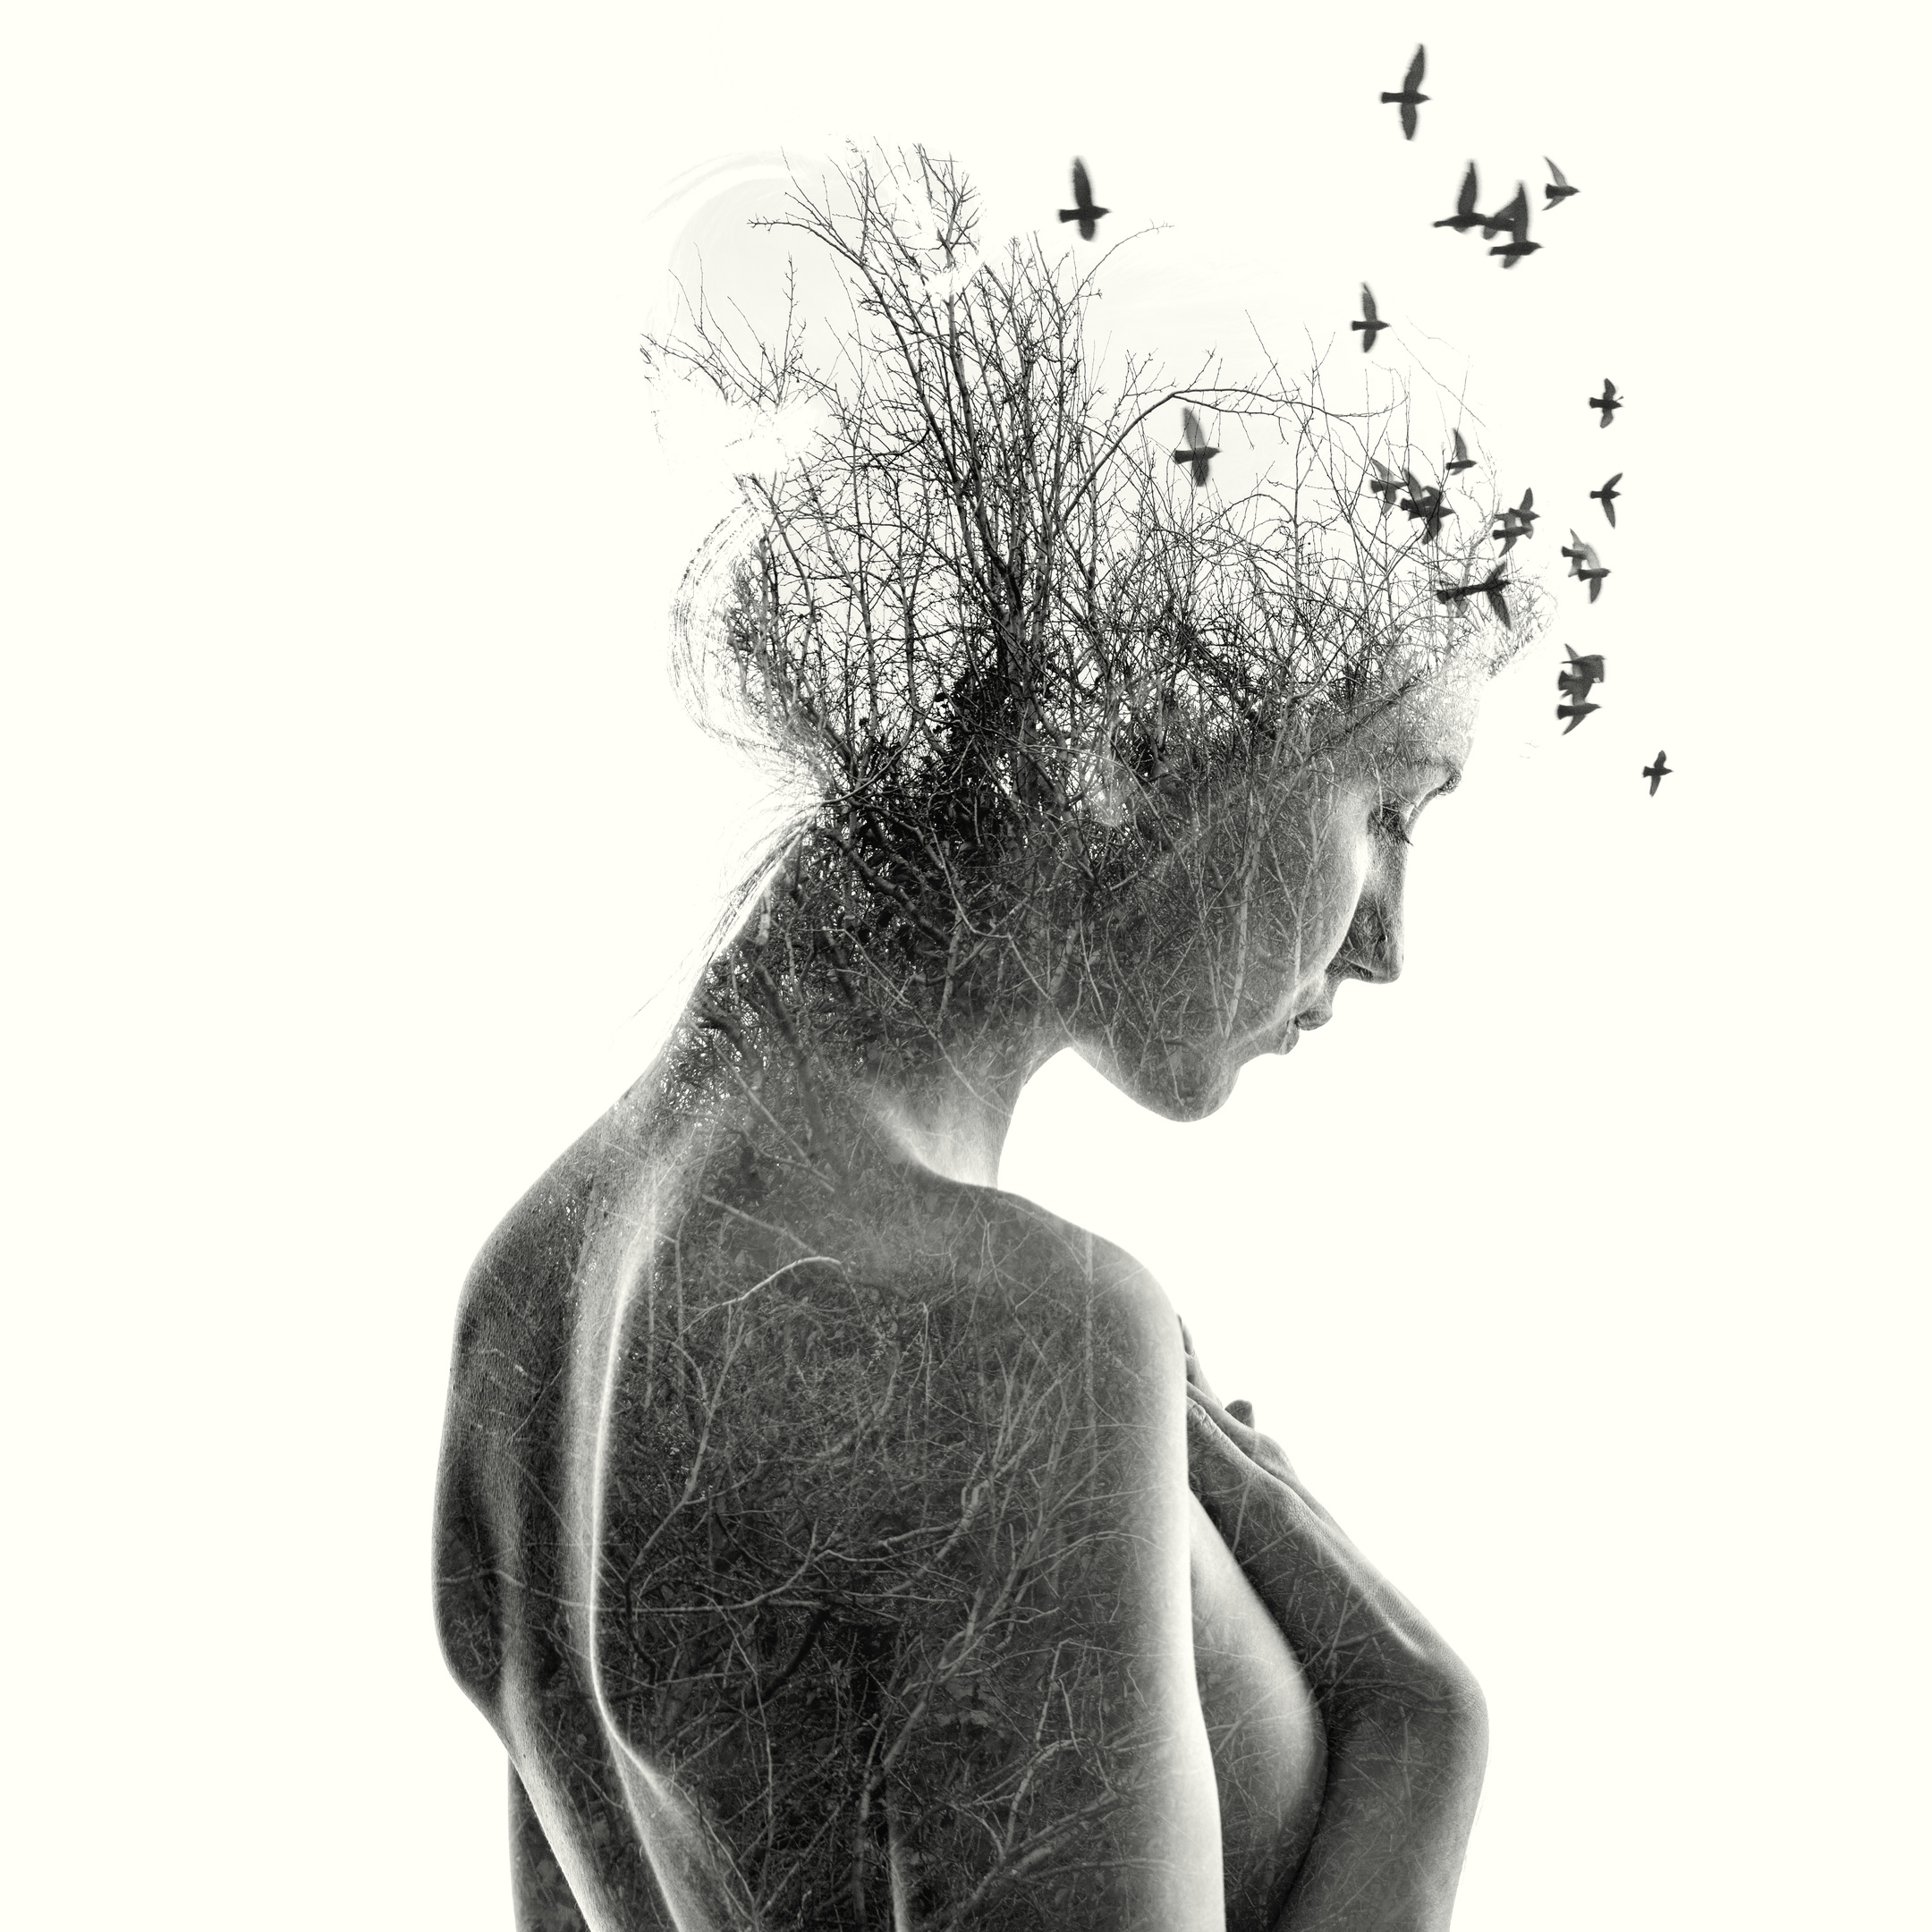 Mr. Winram's artwork melds black and white photography of women with scenes from nature